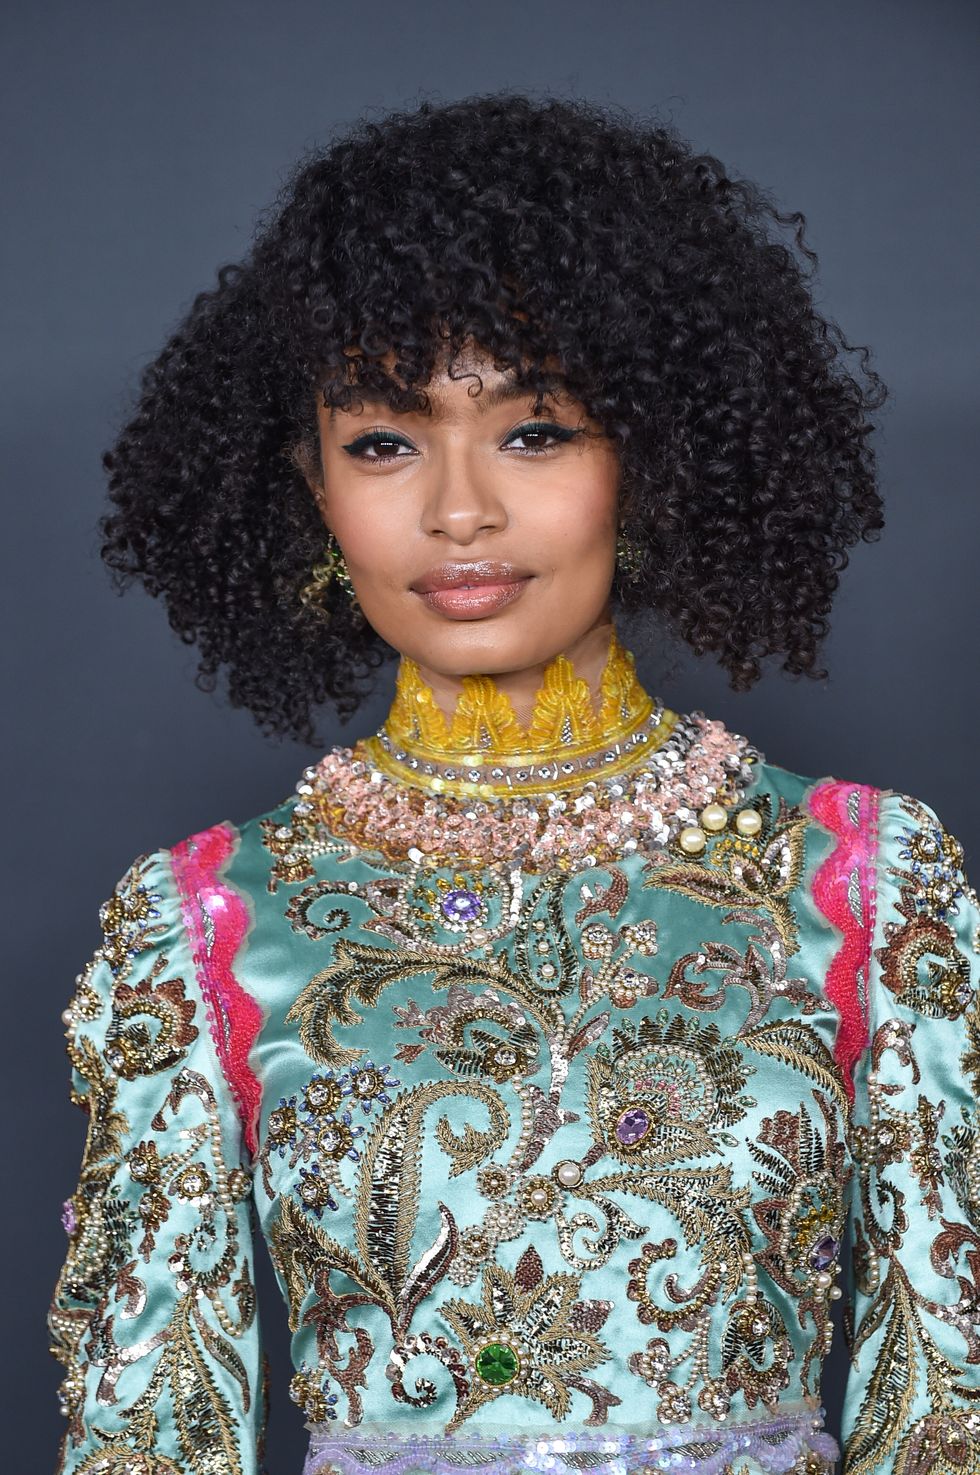 yara-shahidi-attends-the-51st-naacp-image-awards-at-the-news-photo-1585079739.jpg?crop=1xw:1xh;center,top&resize=980:*